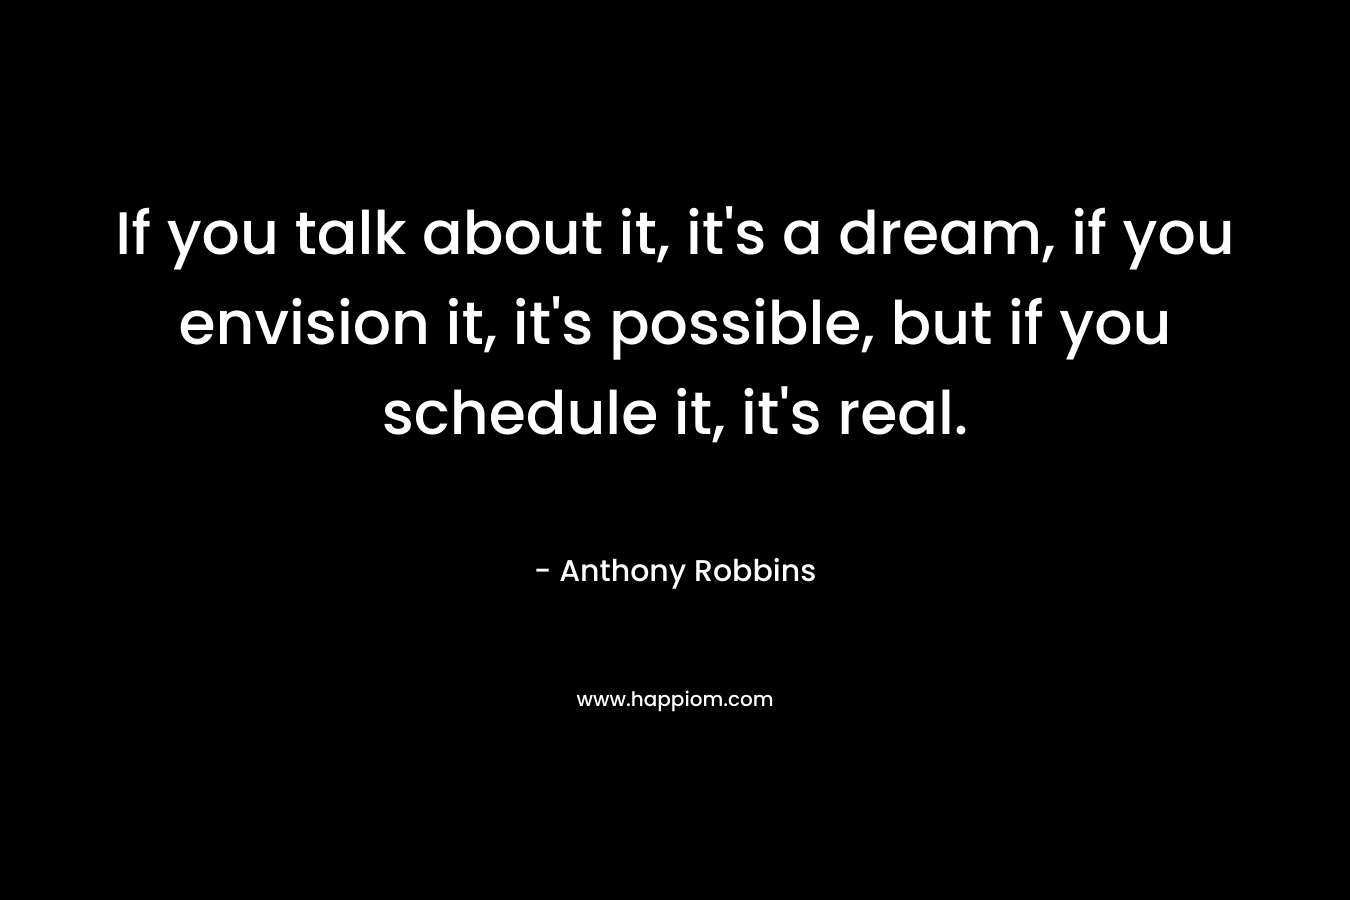 If you talk about it, it’s a dream, if you envision it, it’s possible, but if you schedule it, it’s real. – Anthony Robbins